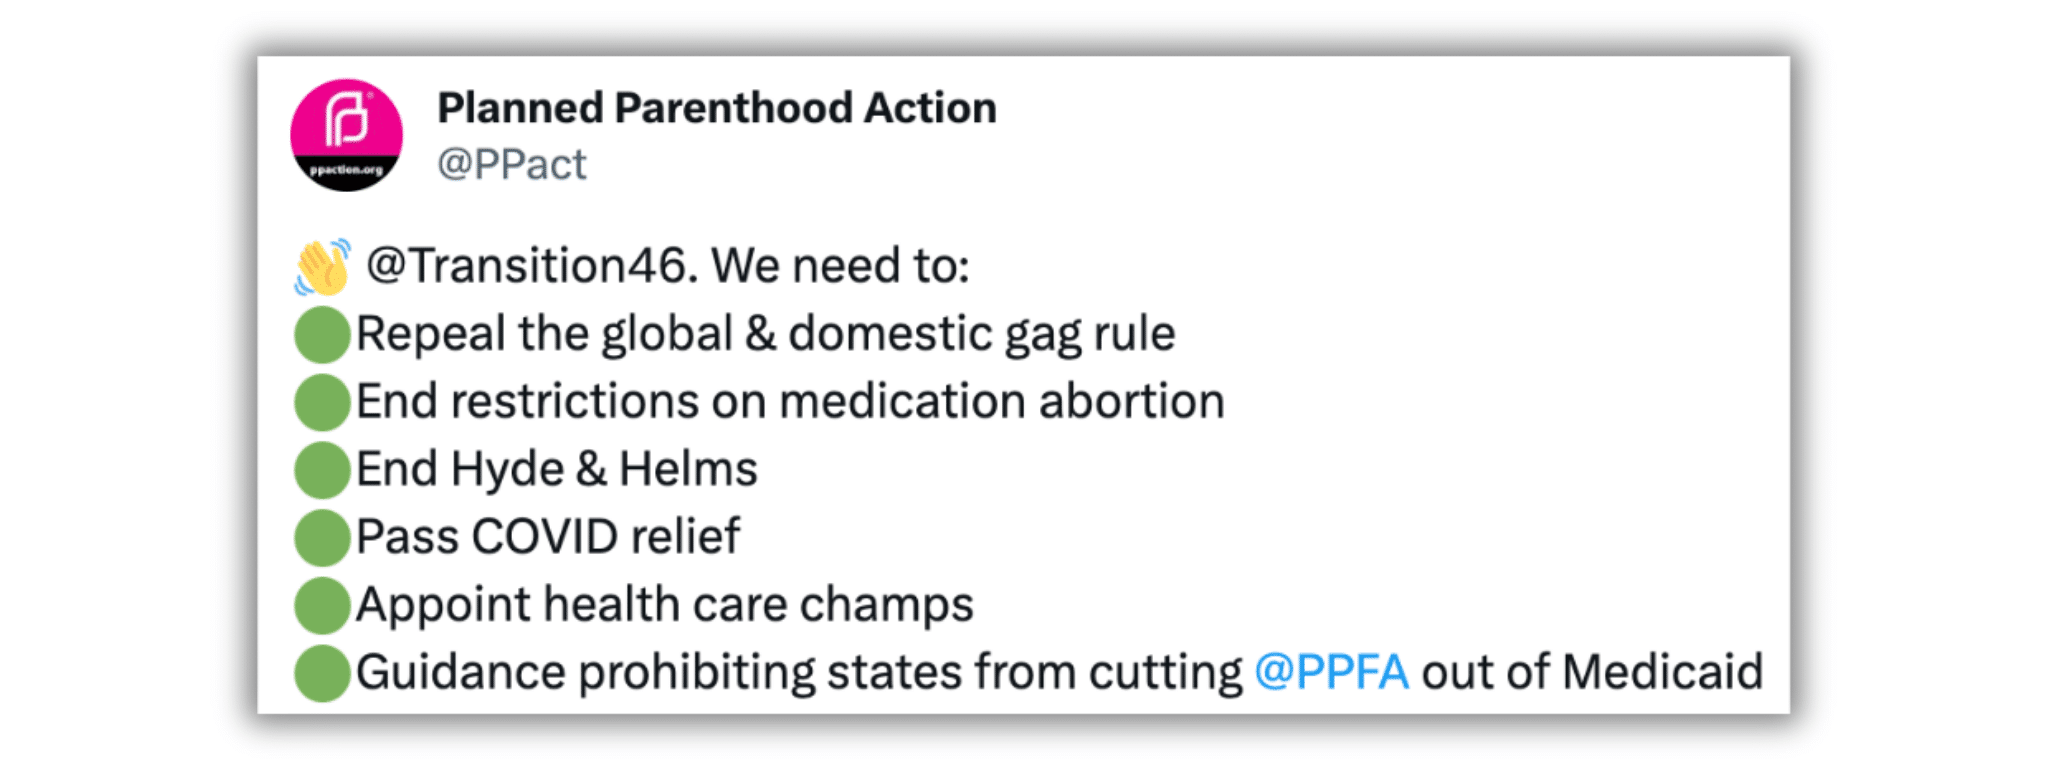 tweet from Planned Parenthood Action promoting abortion during COVID